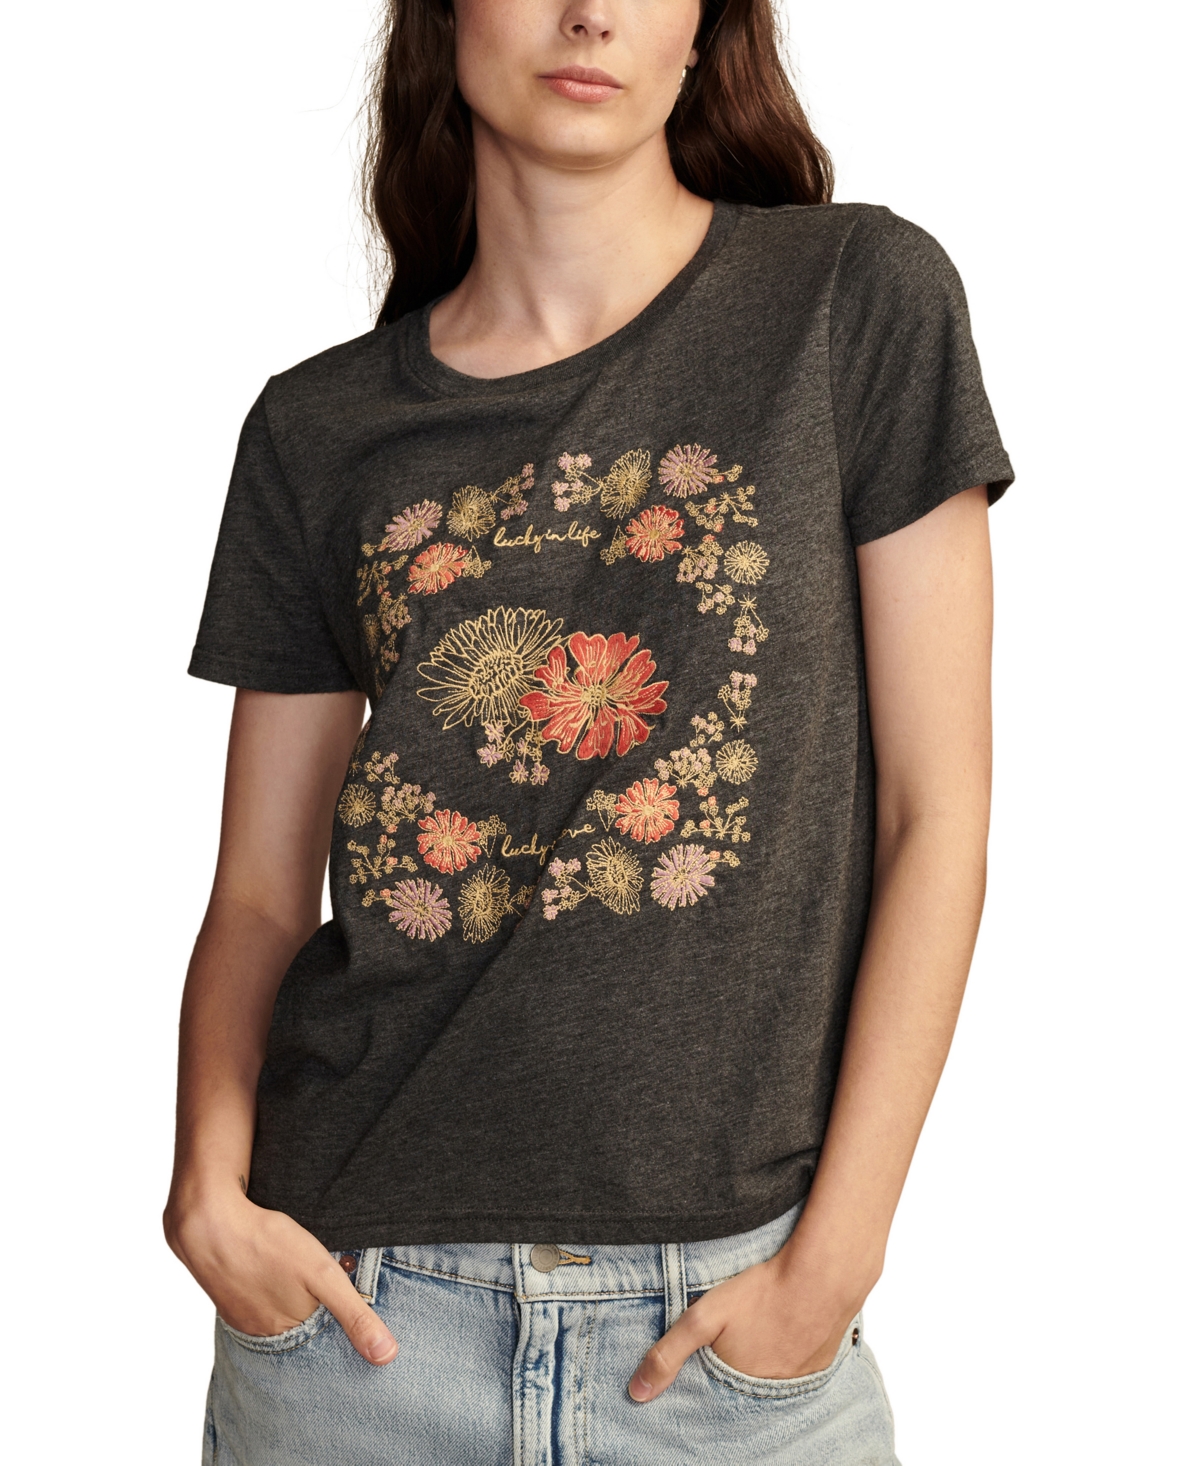 Women's Floral Embroidery Classic Crewneck T-Shirt - Charcoal Heather Grey